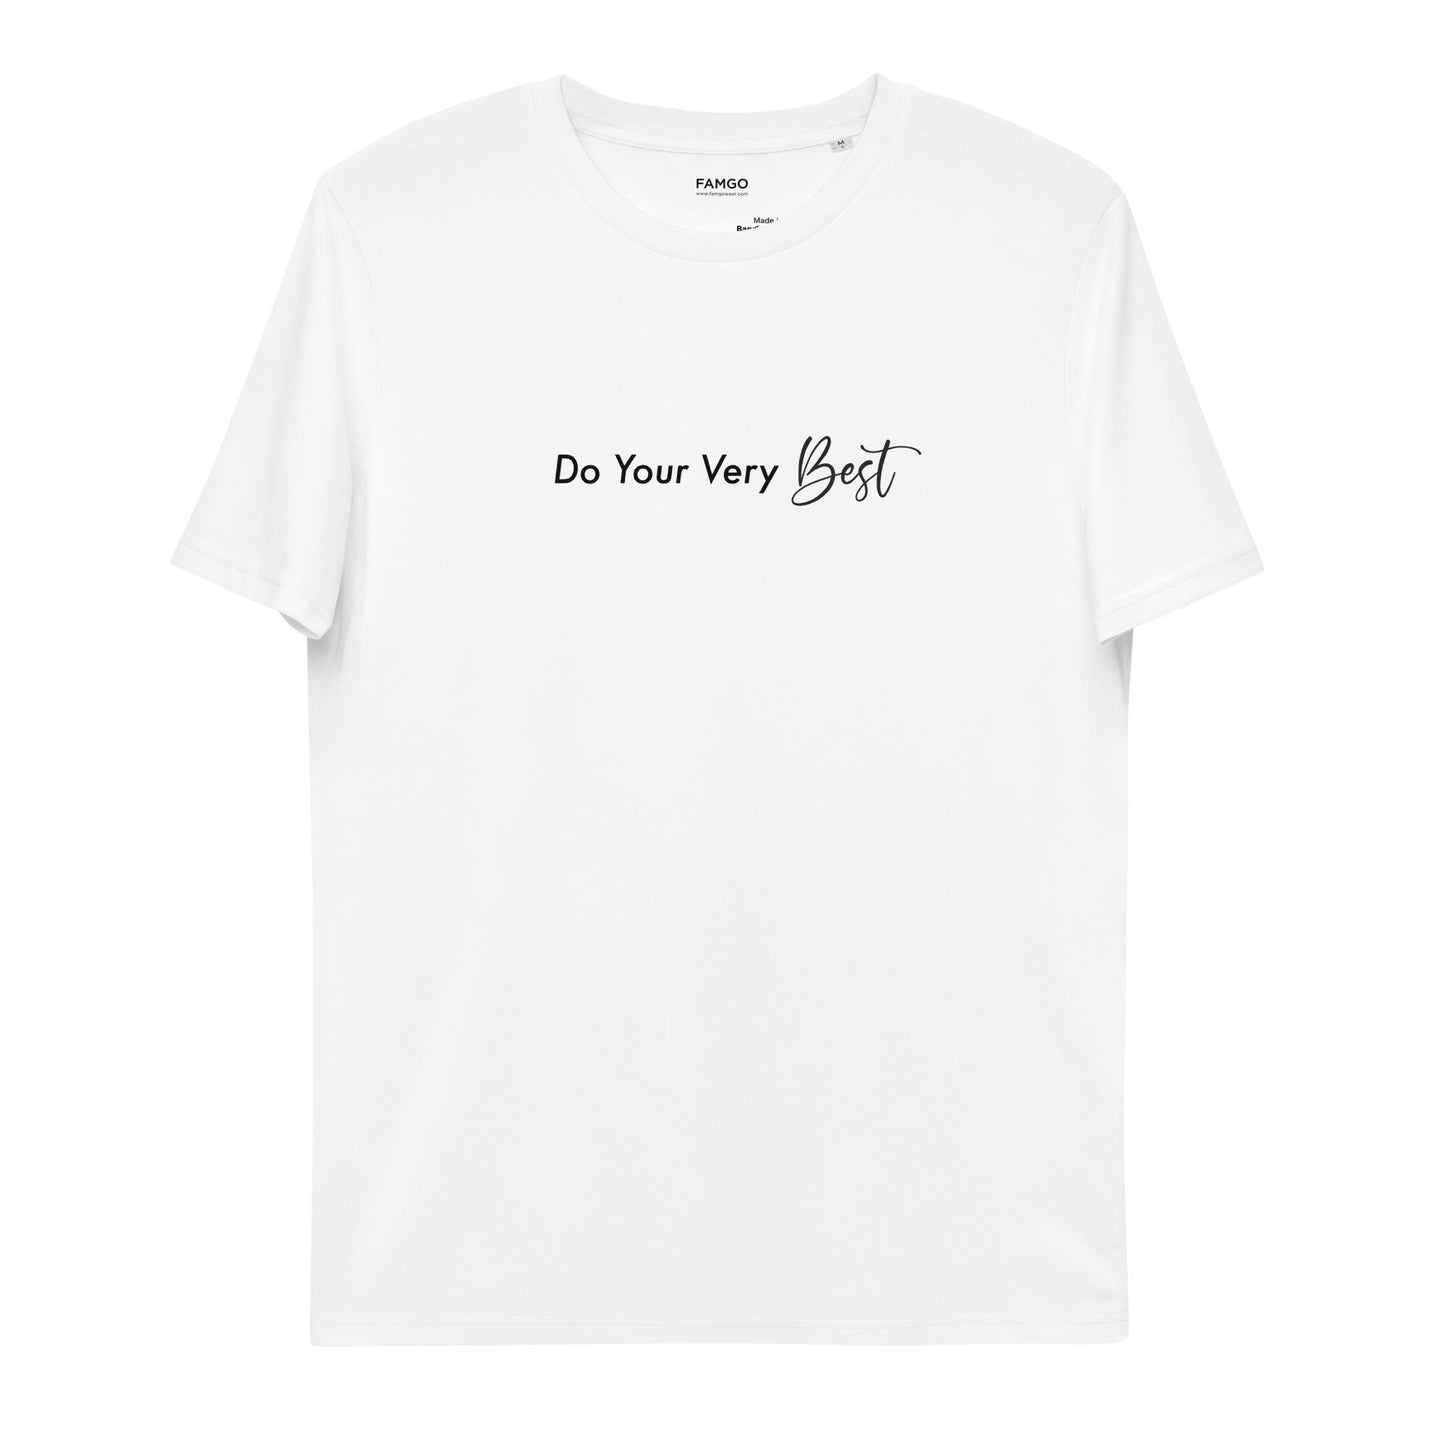 Women white motivational t-shirt with motivational quote, "Do Your Very Best."